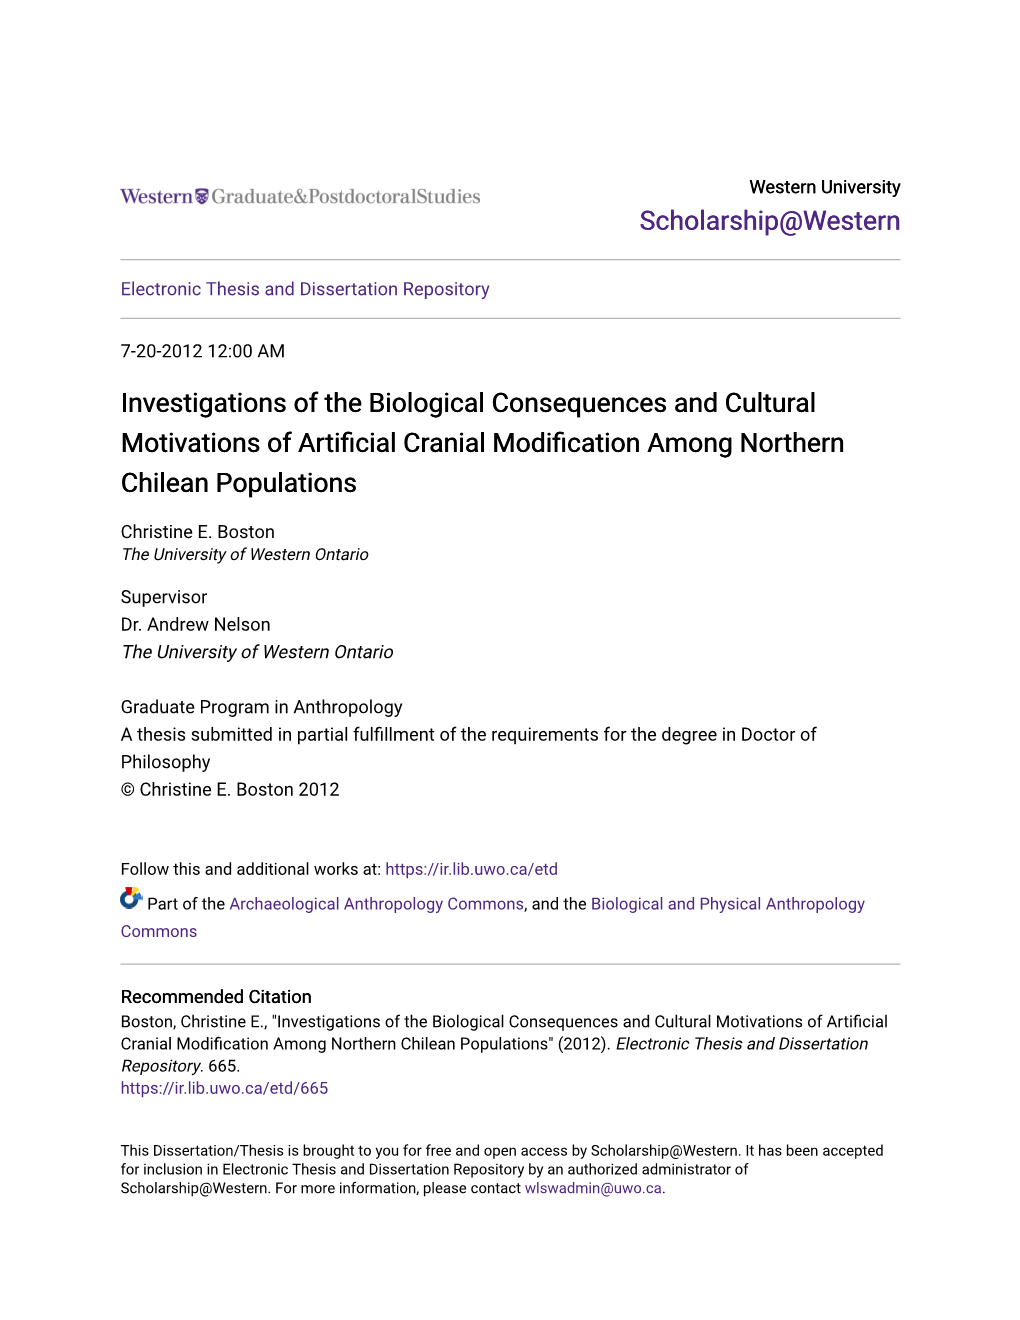 Investigations of the Biological Consequences and Cultural Motivations of Artificial Cranial Modification Among Northern Chilean Populations